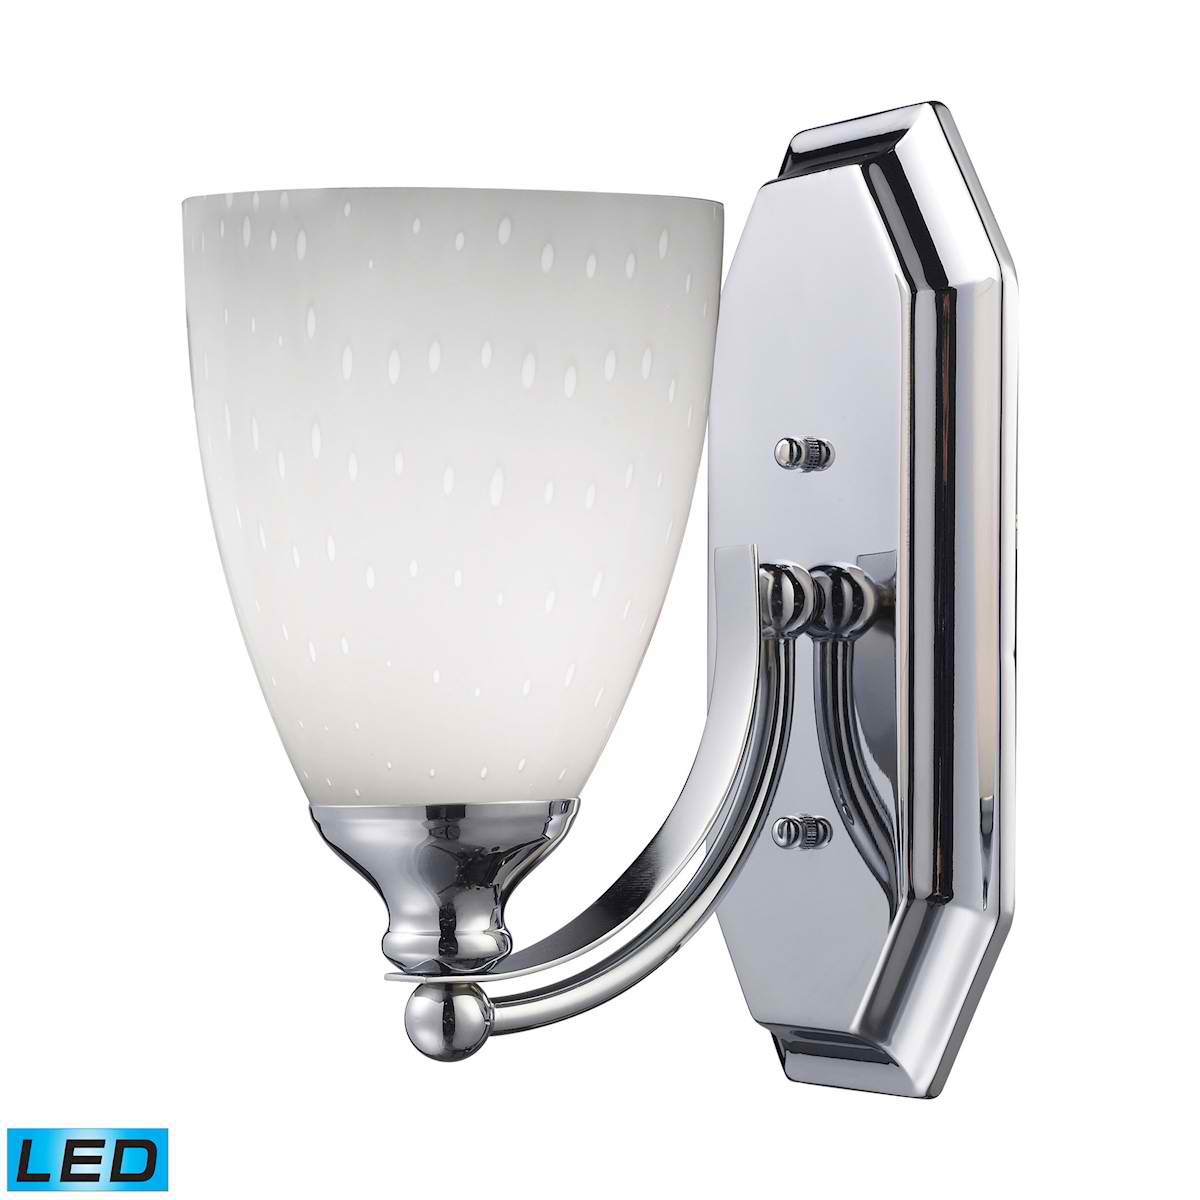 1 Light Vanity in Polished Chrome and Simply White Glass - LED Offering Up To 800 Lumens (60 Watt Equivalent)